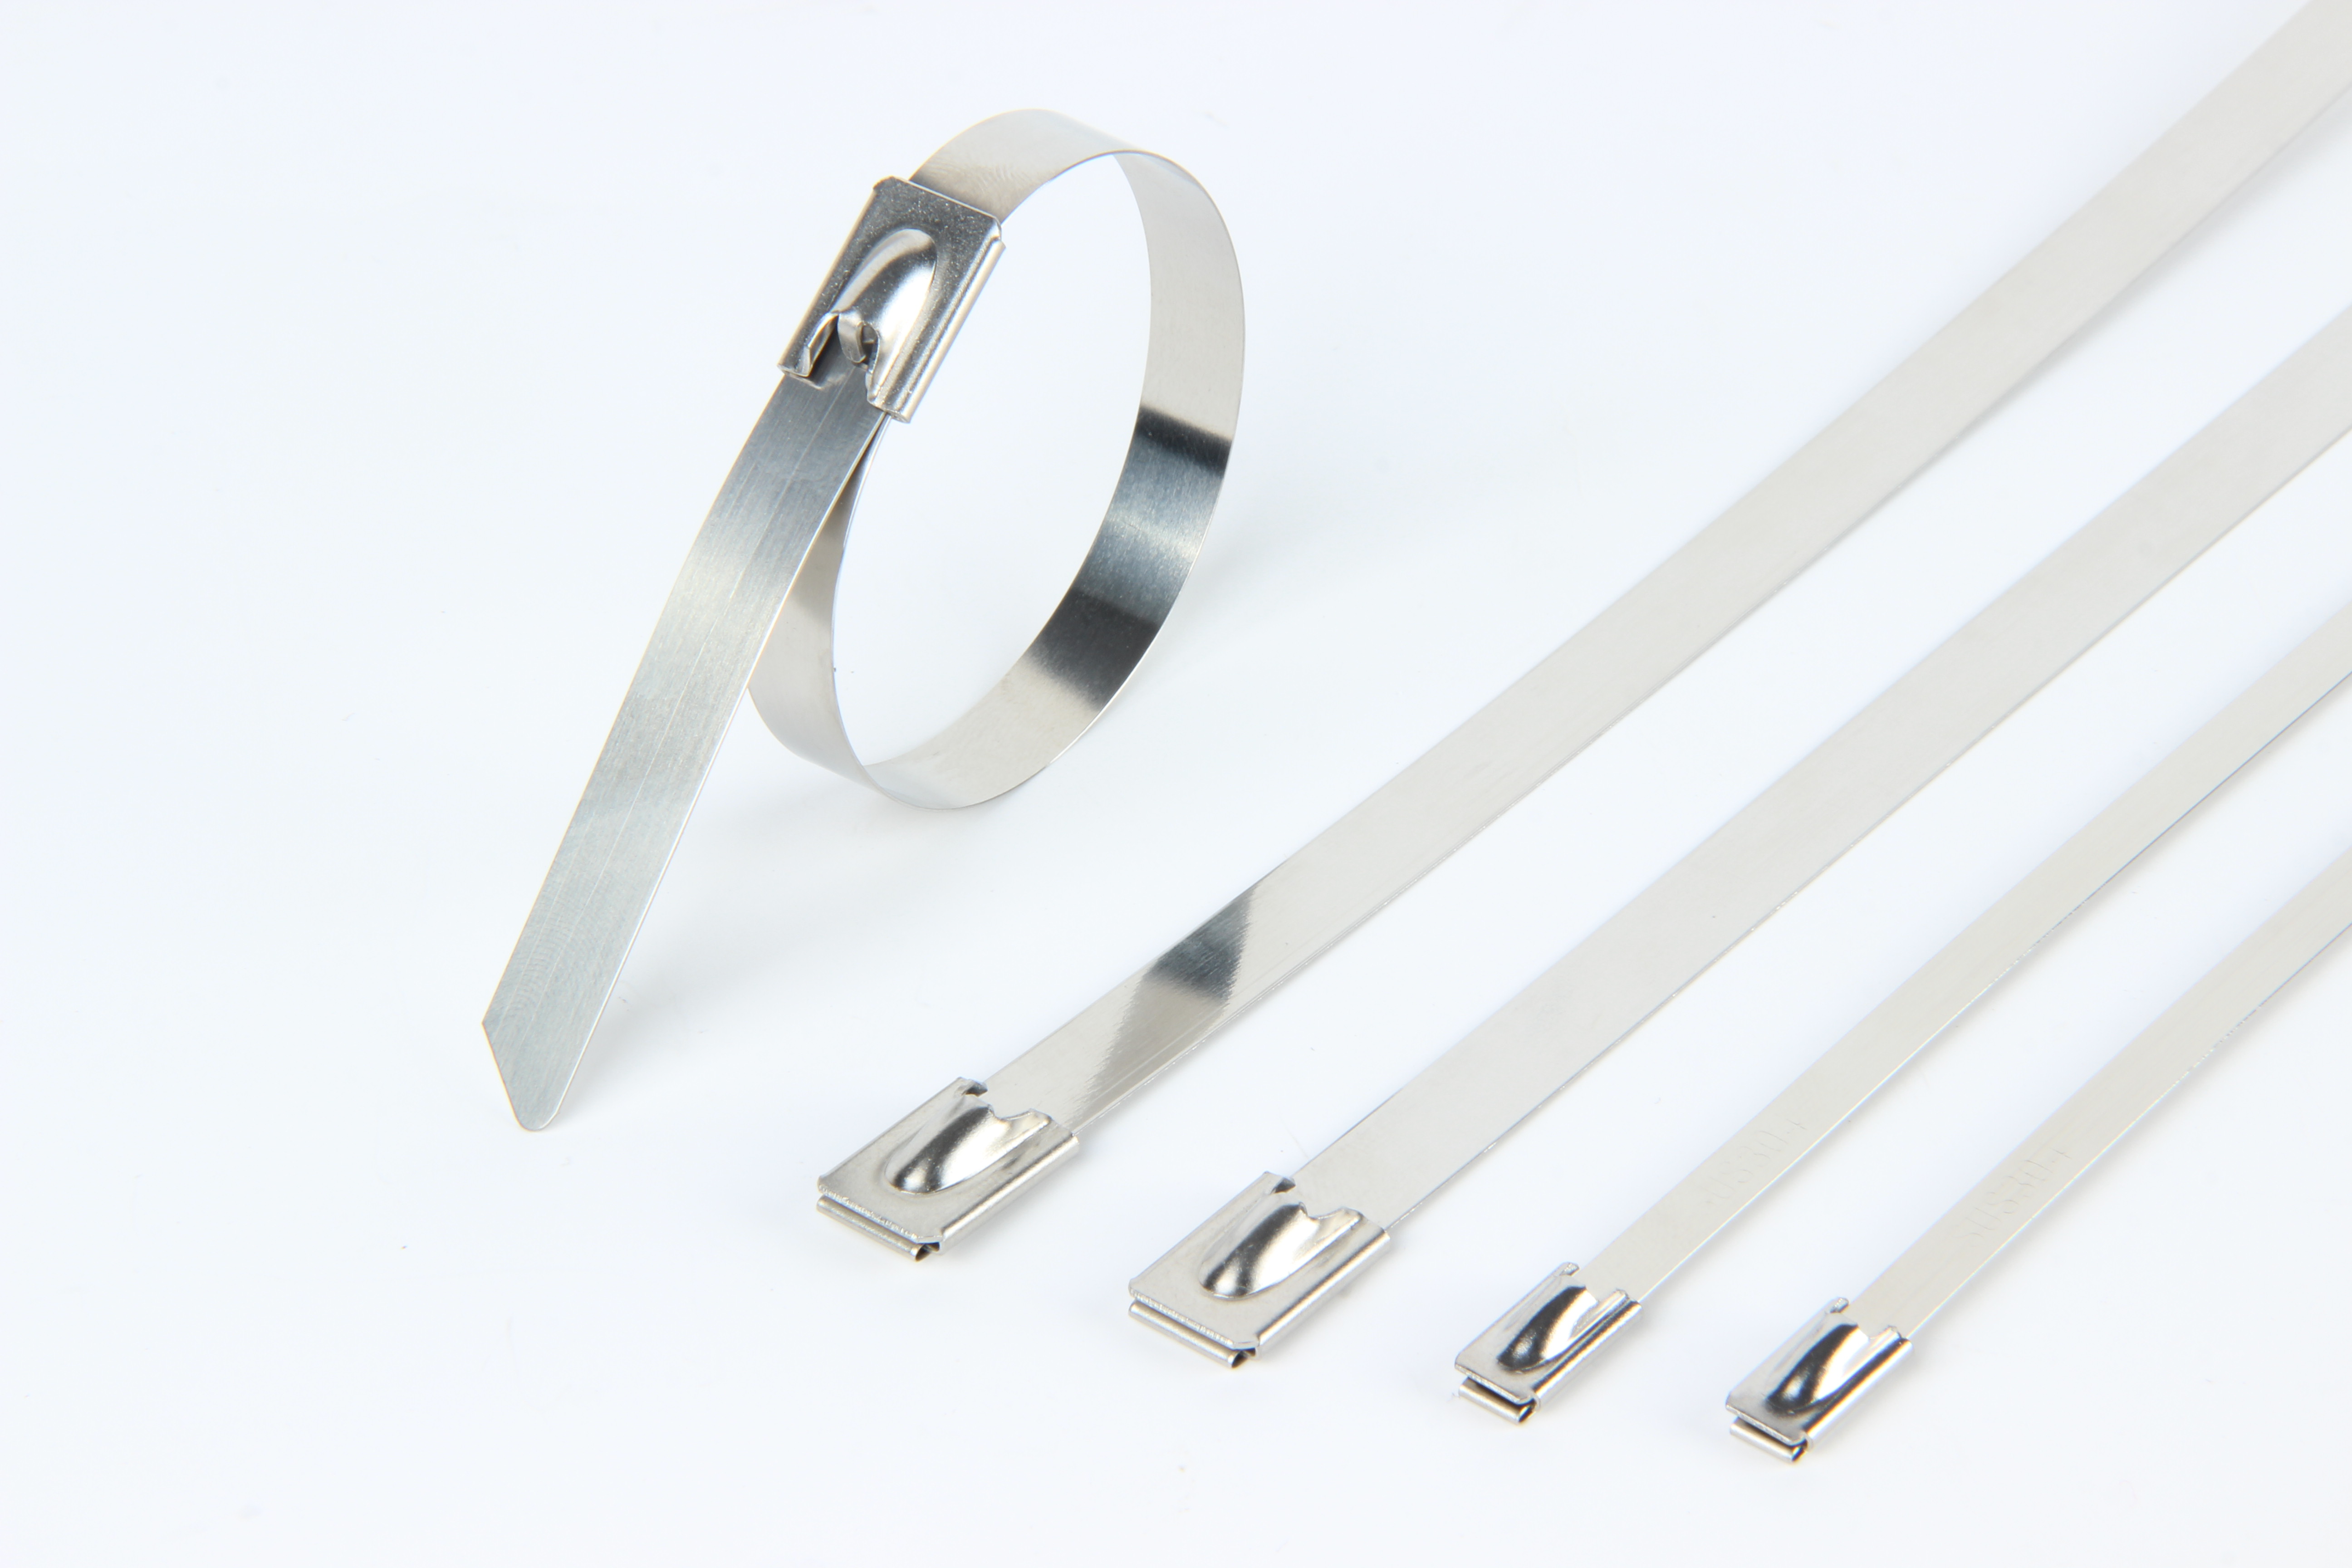 Stainless Steel Self Lock Uncoated Cable Tie Featured Image